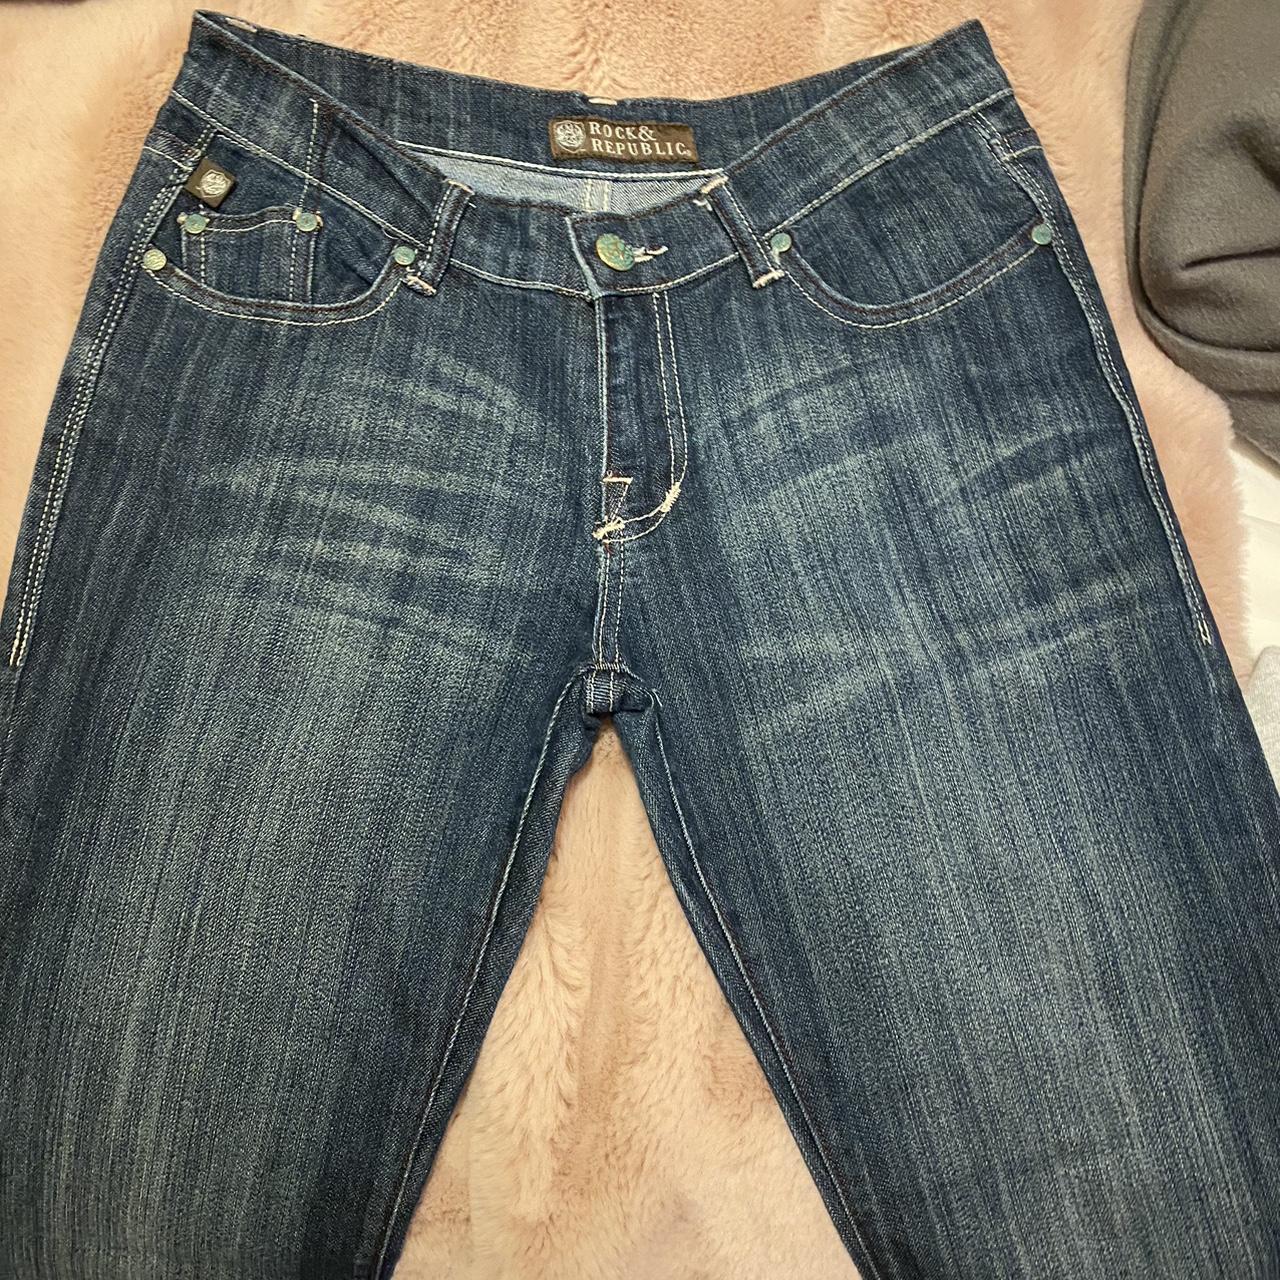 rock and republic flared jeans selling as too... - Depop